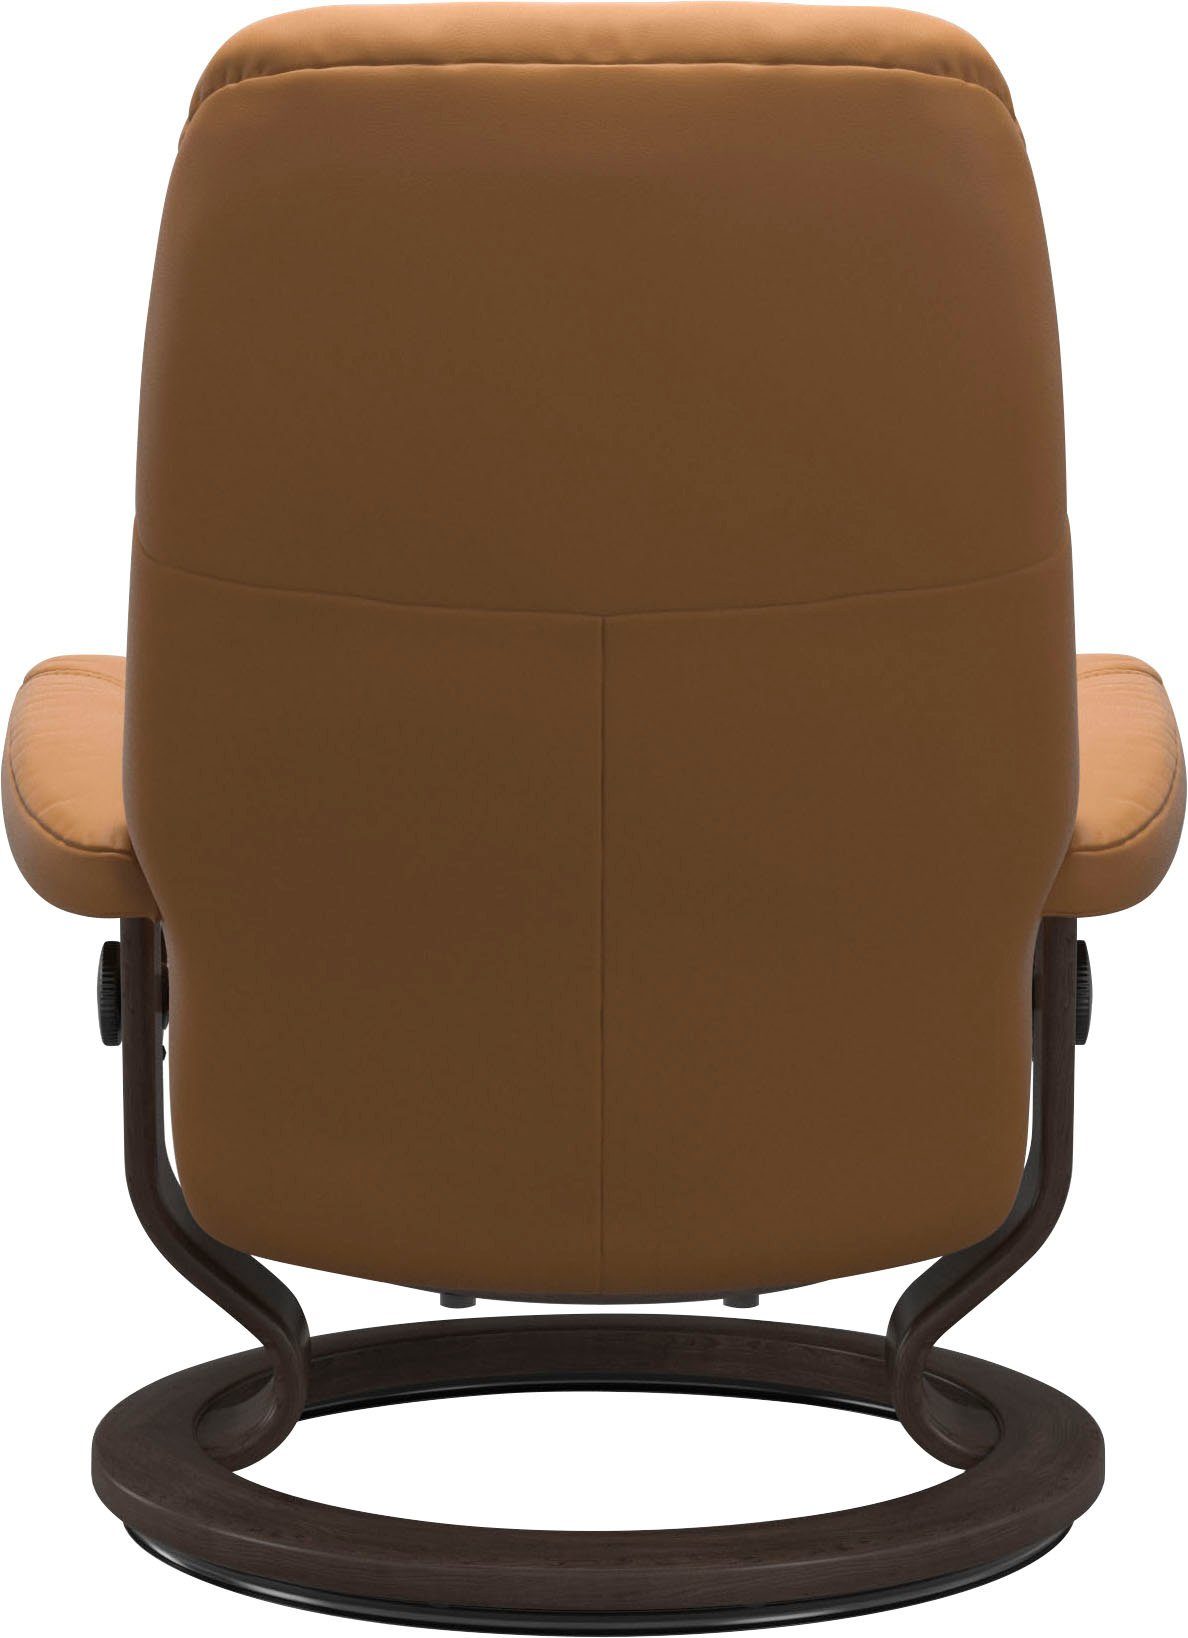 Base, Größe Gestell Consul, M, Classic Relaxsessel mit Wenge Stressless®